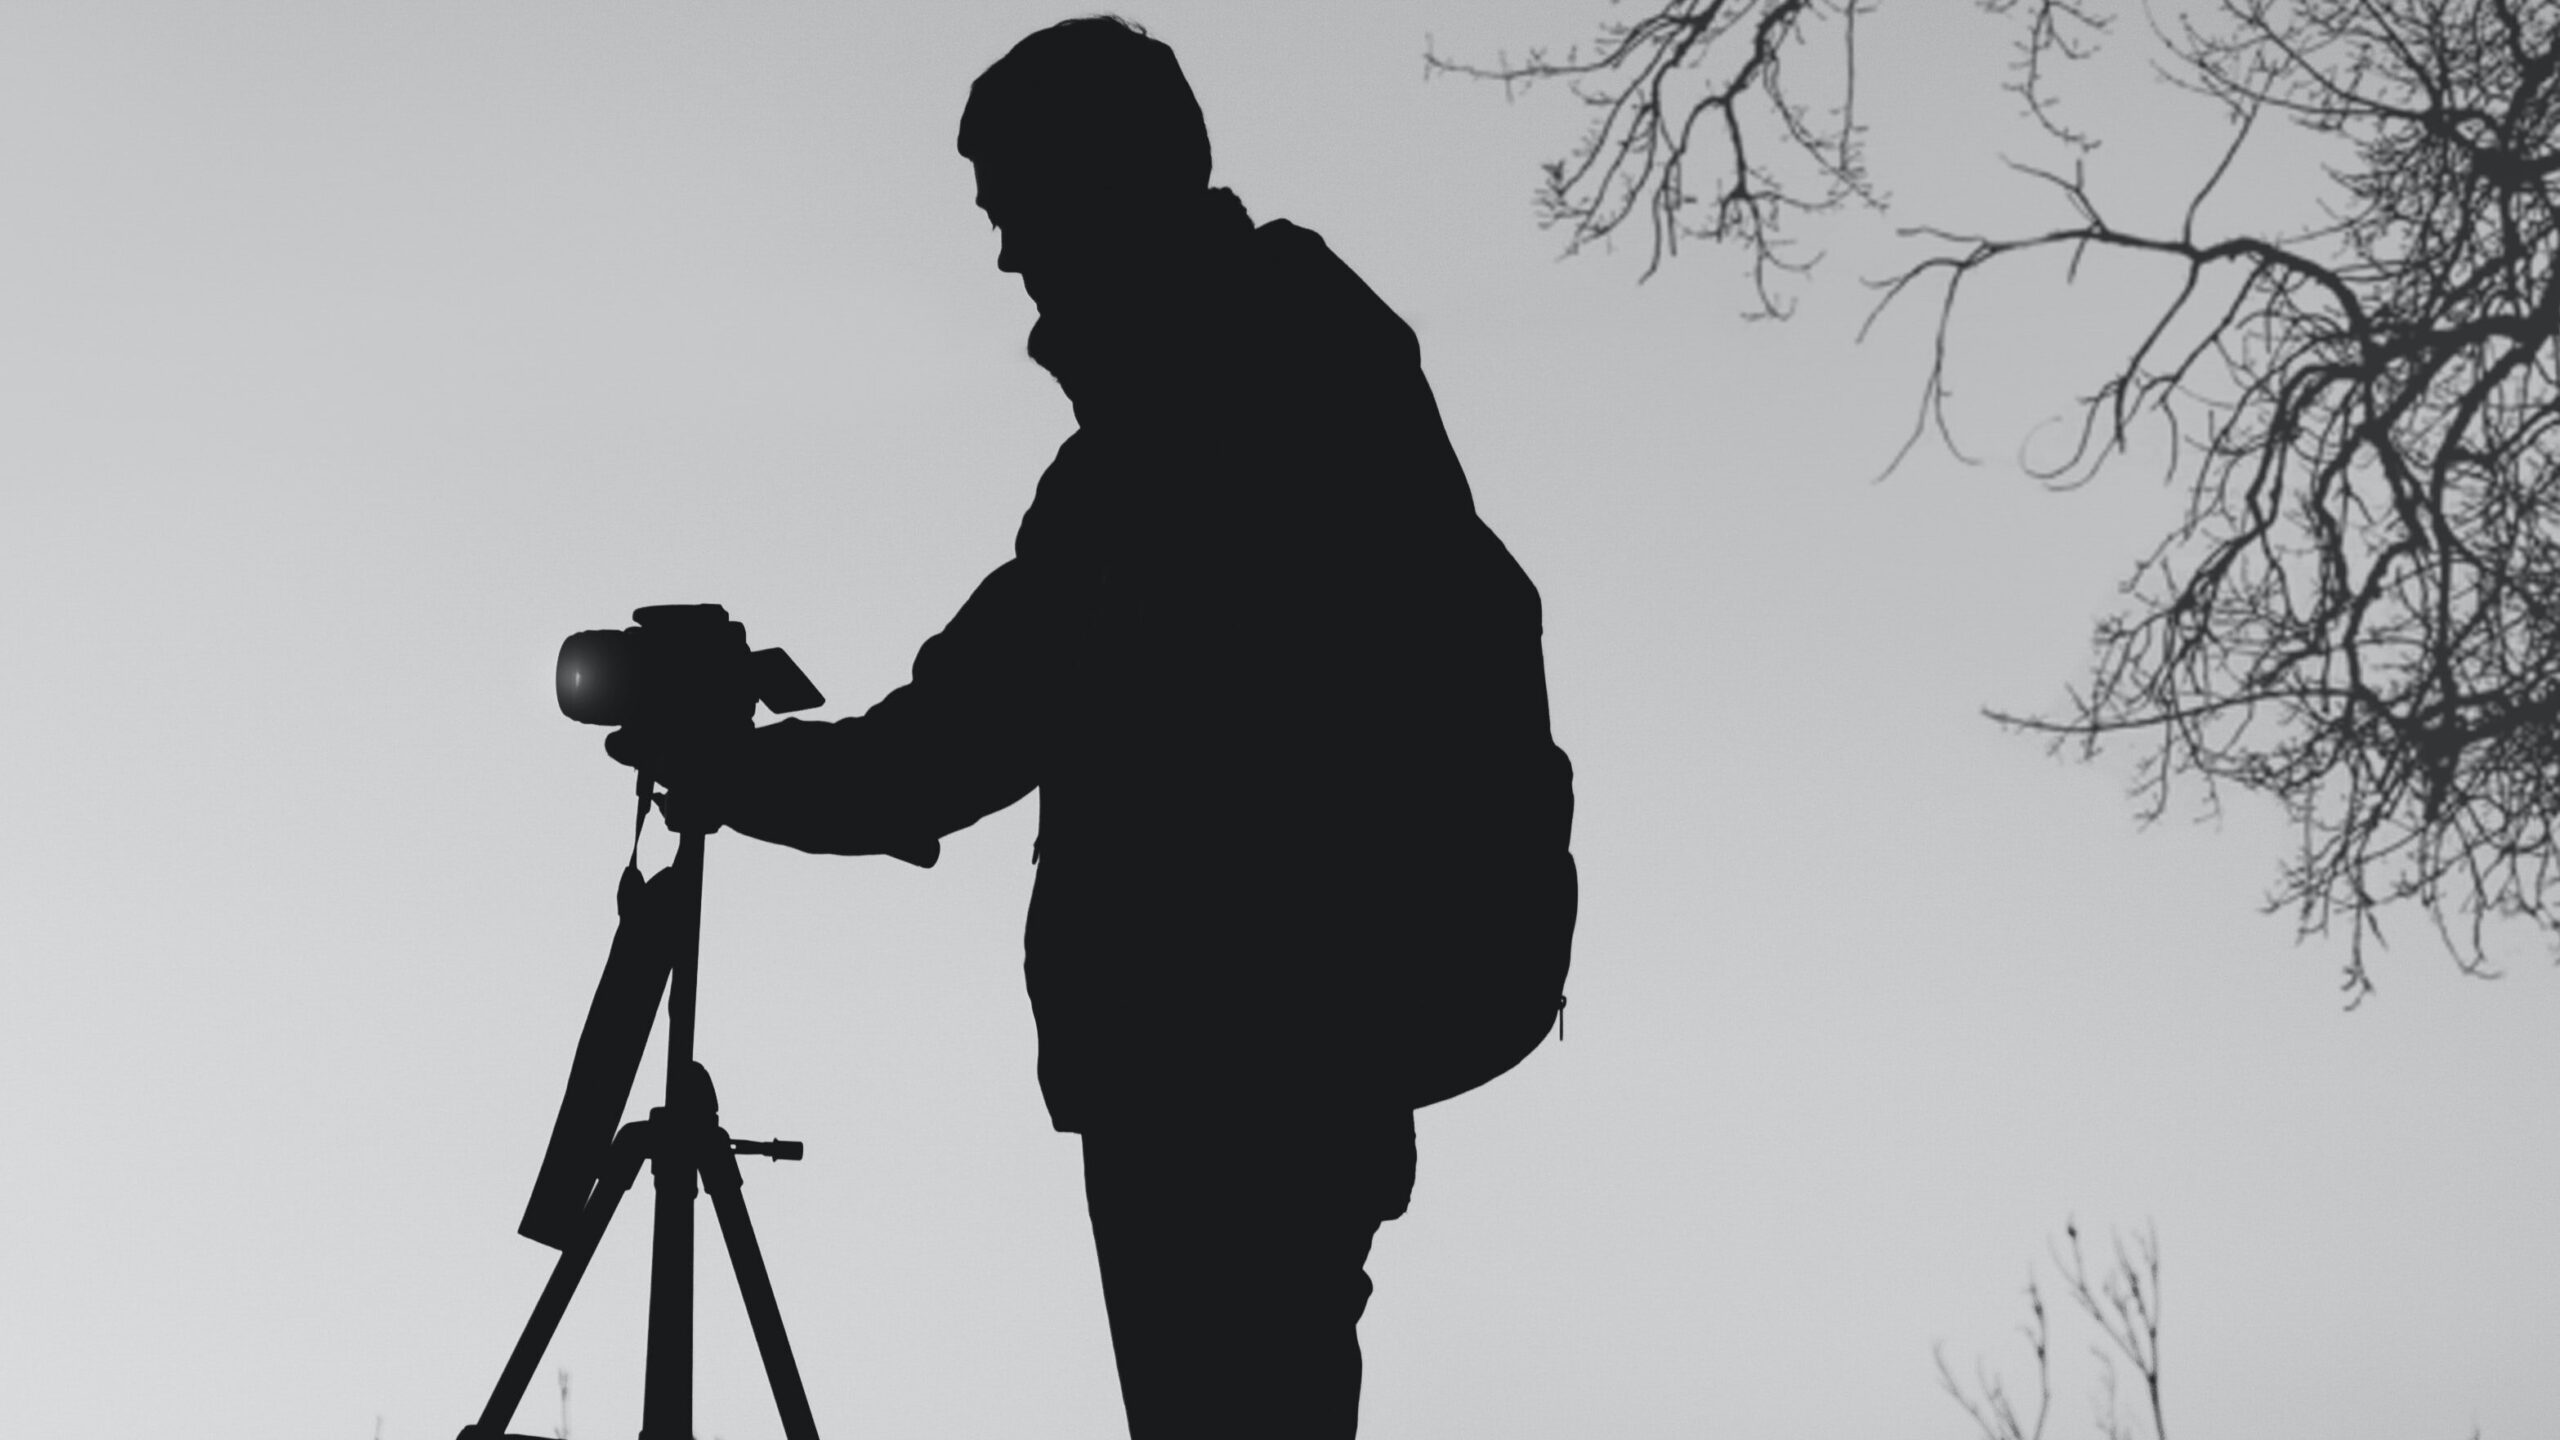 Silhouette Of a Camera Man